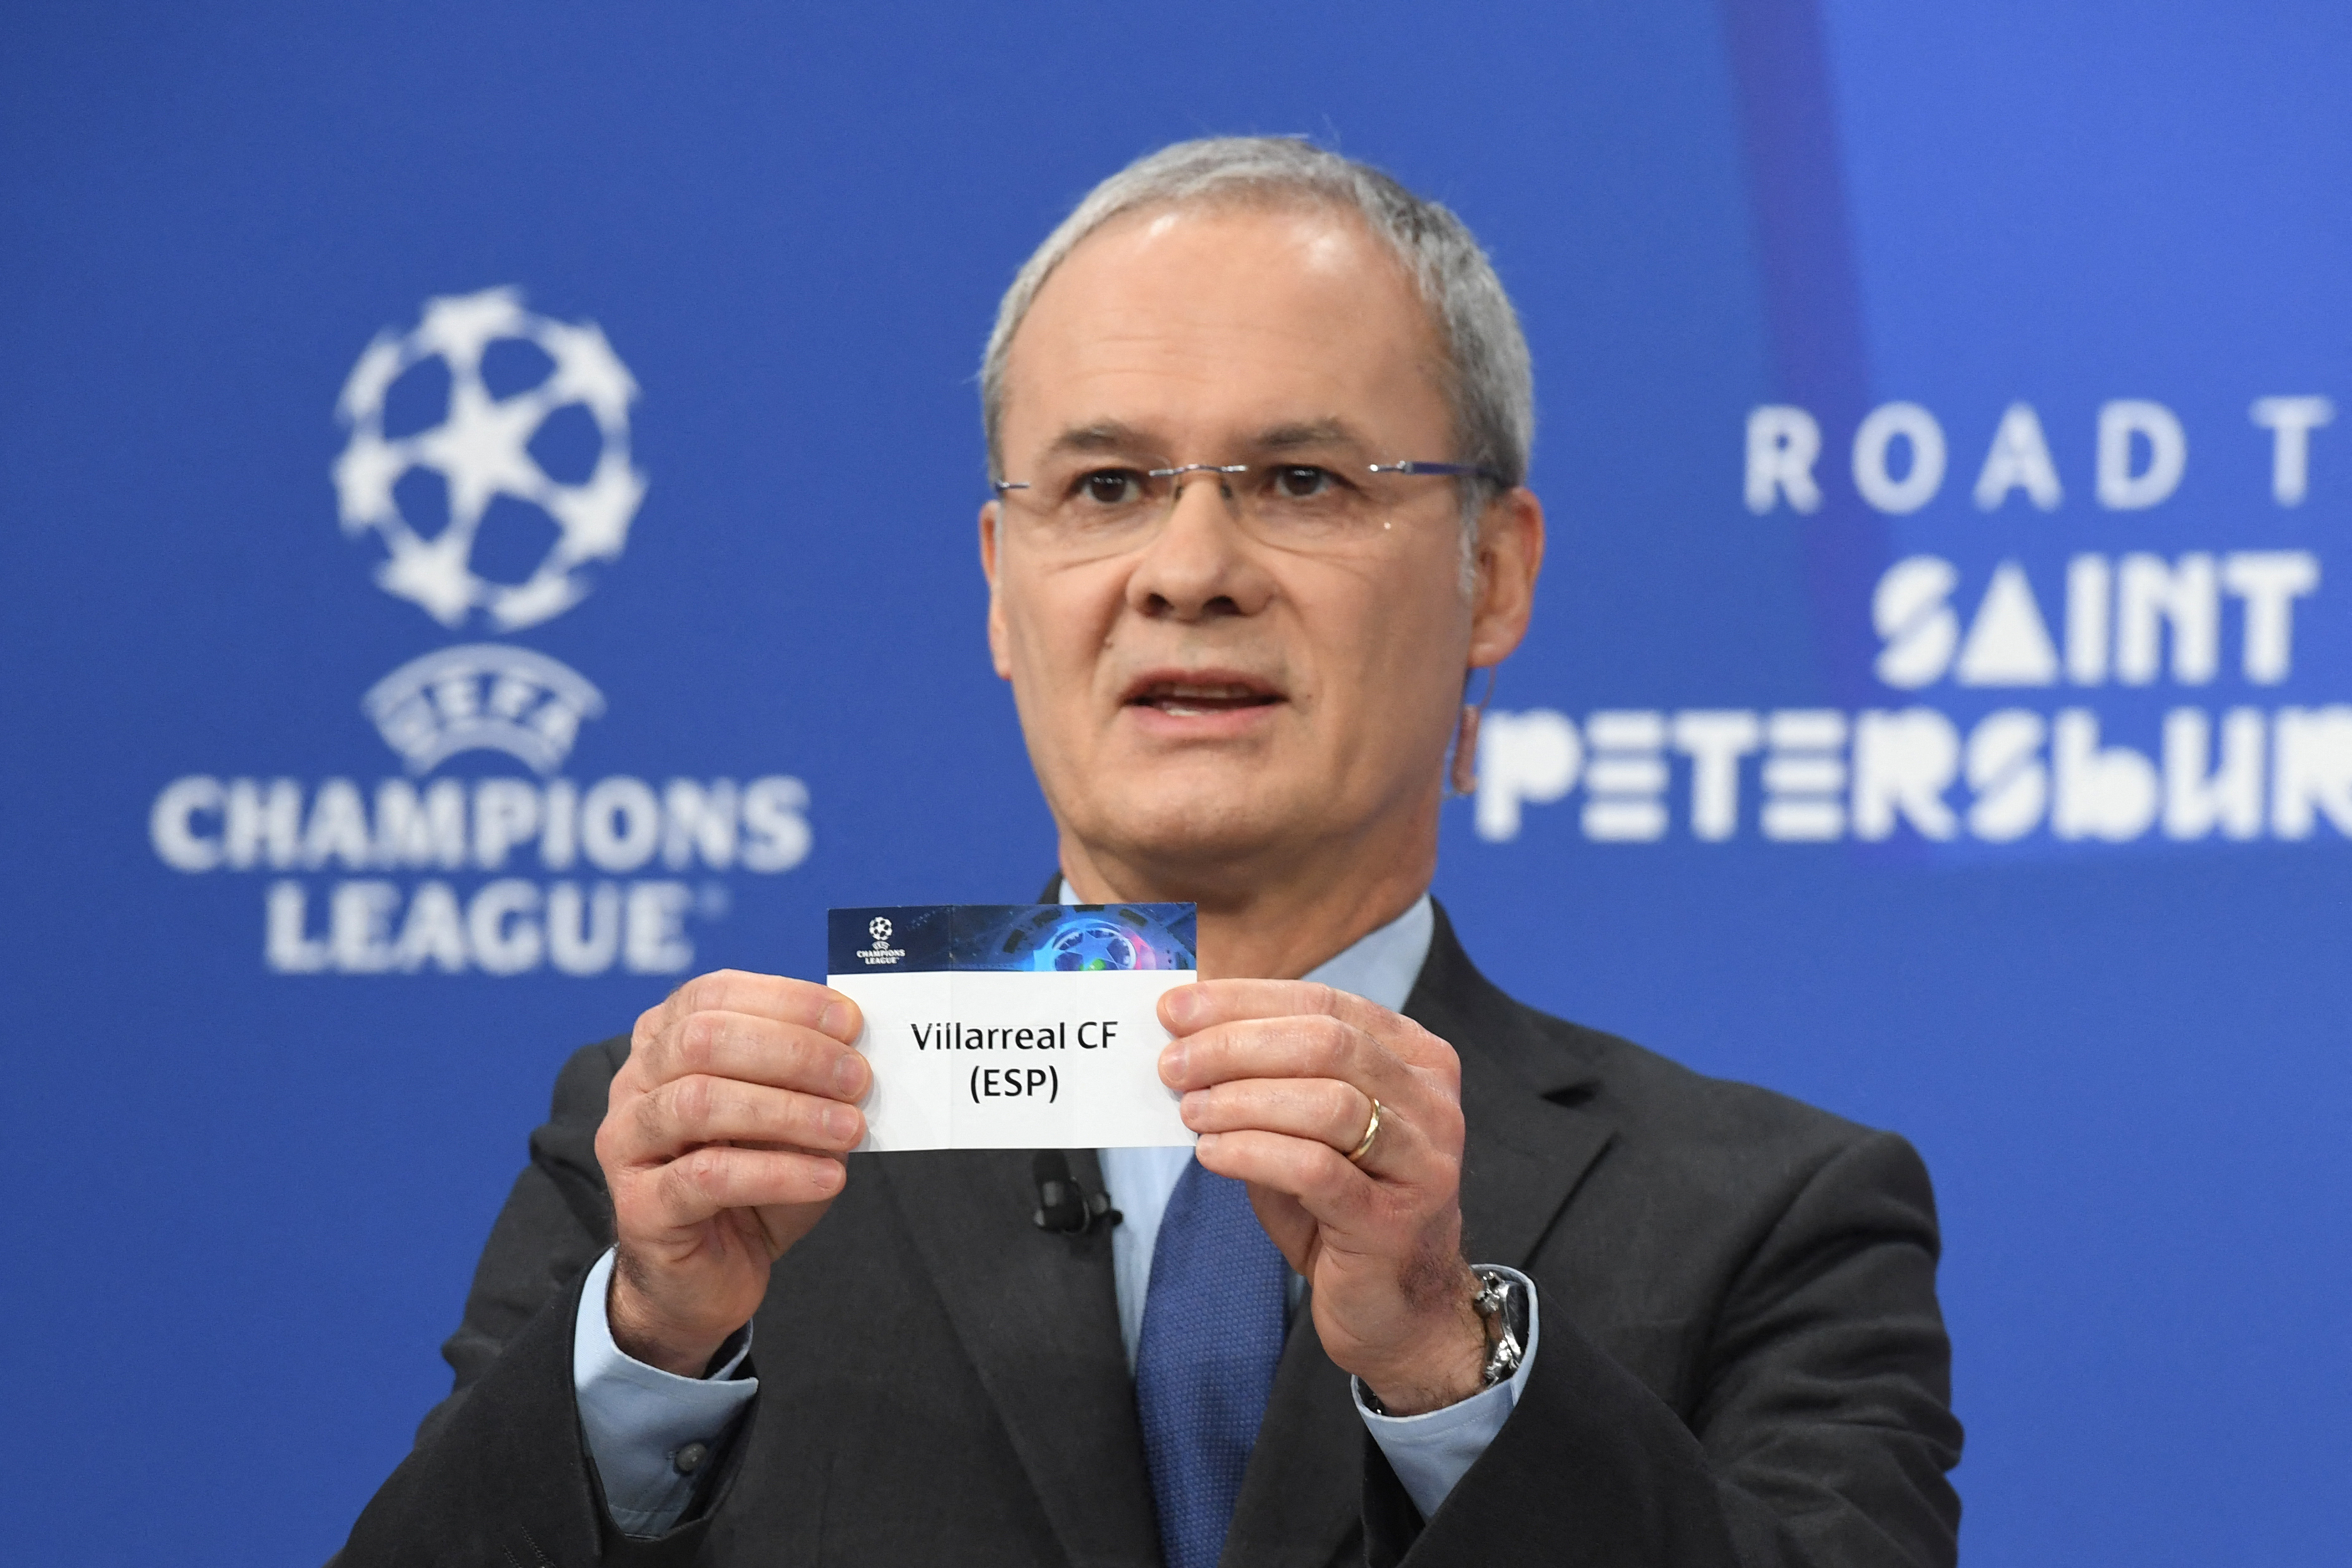 UEFA Champions League 2021-22 Round of 16 Live Streaming - UCL Last 16 Draw  When, Where and How to Watch in India